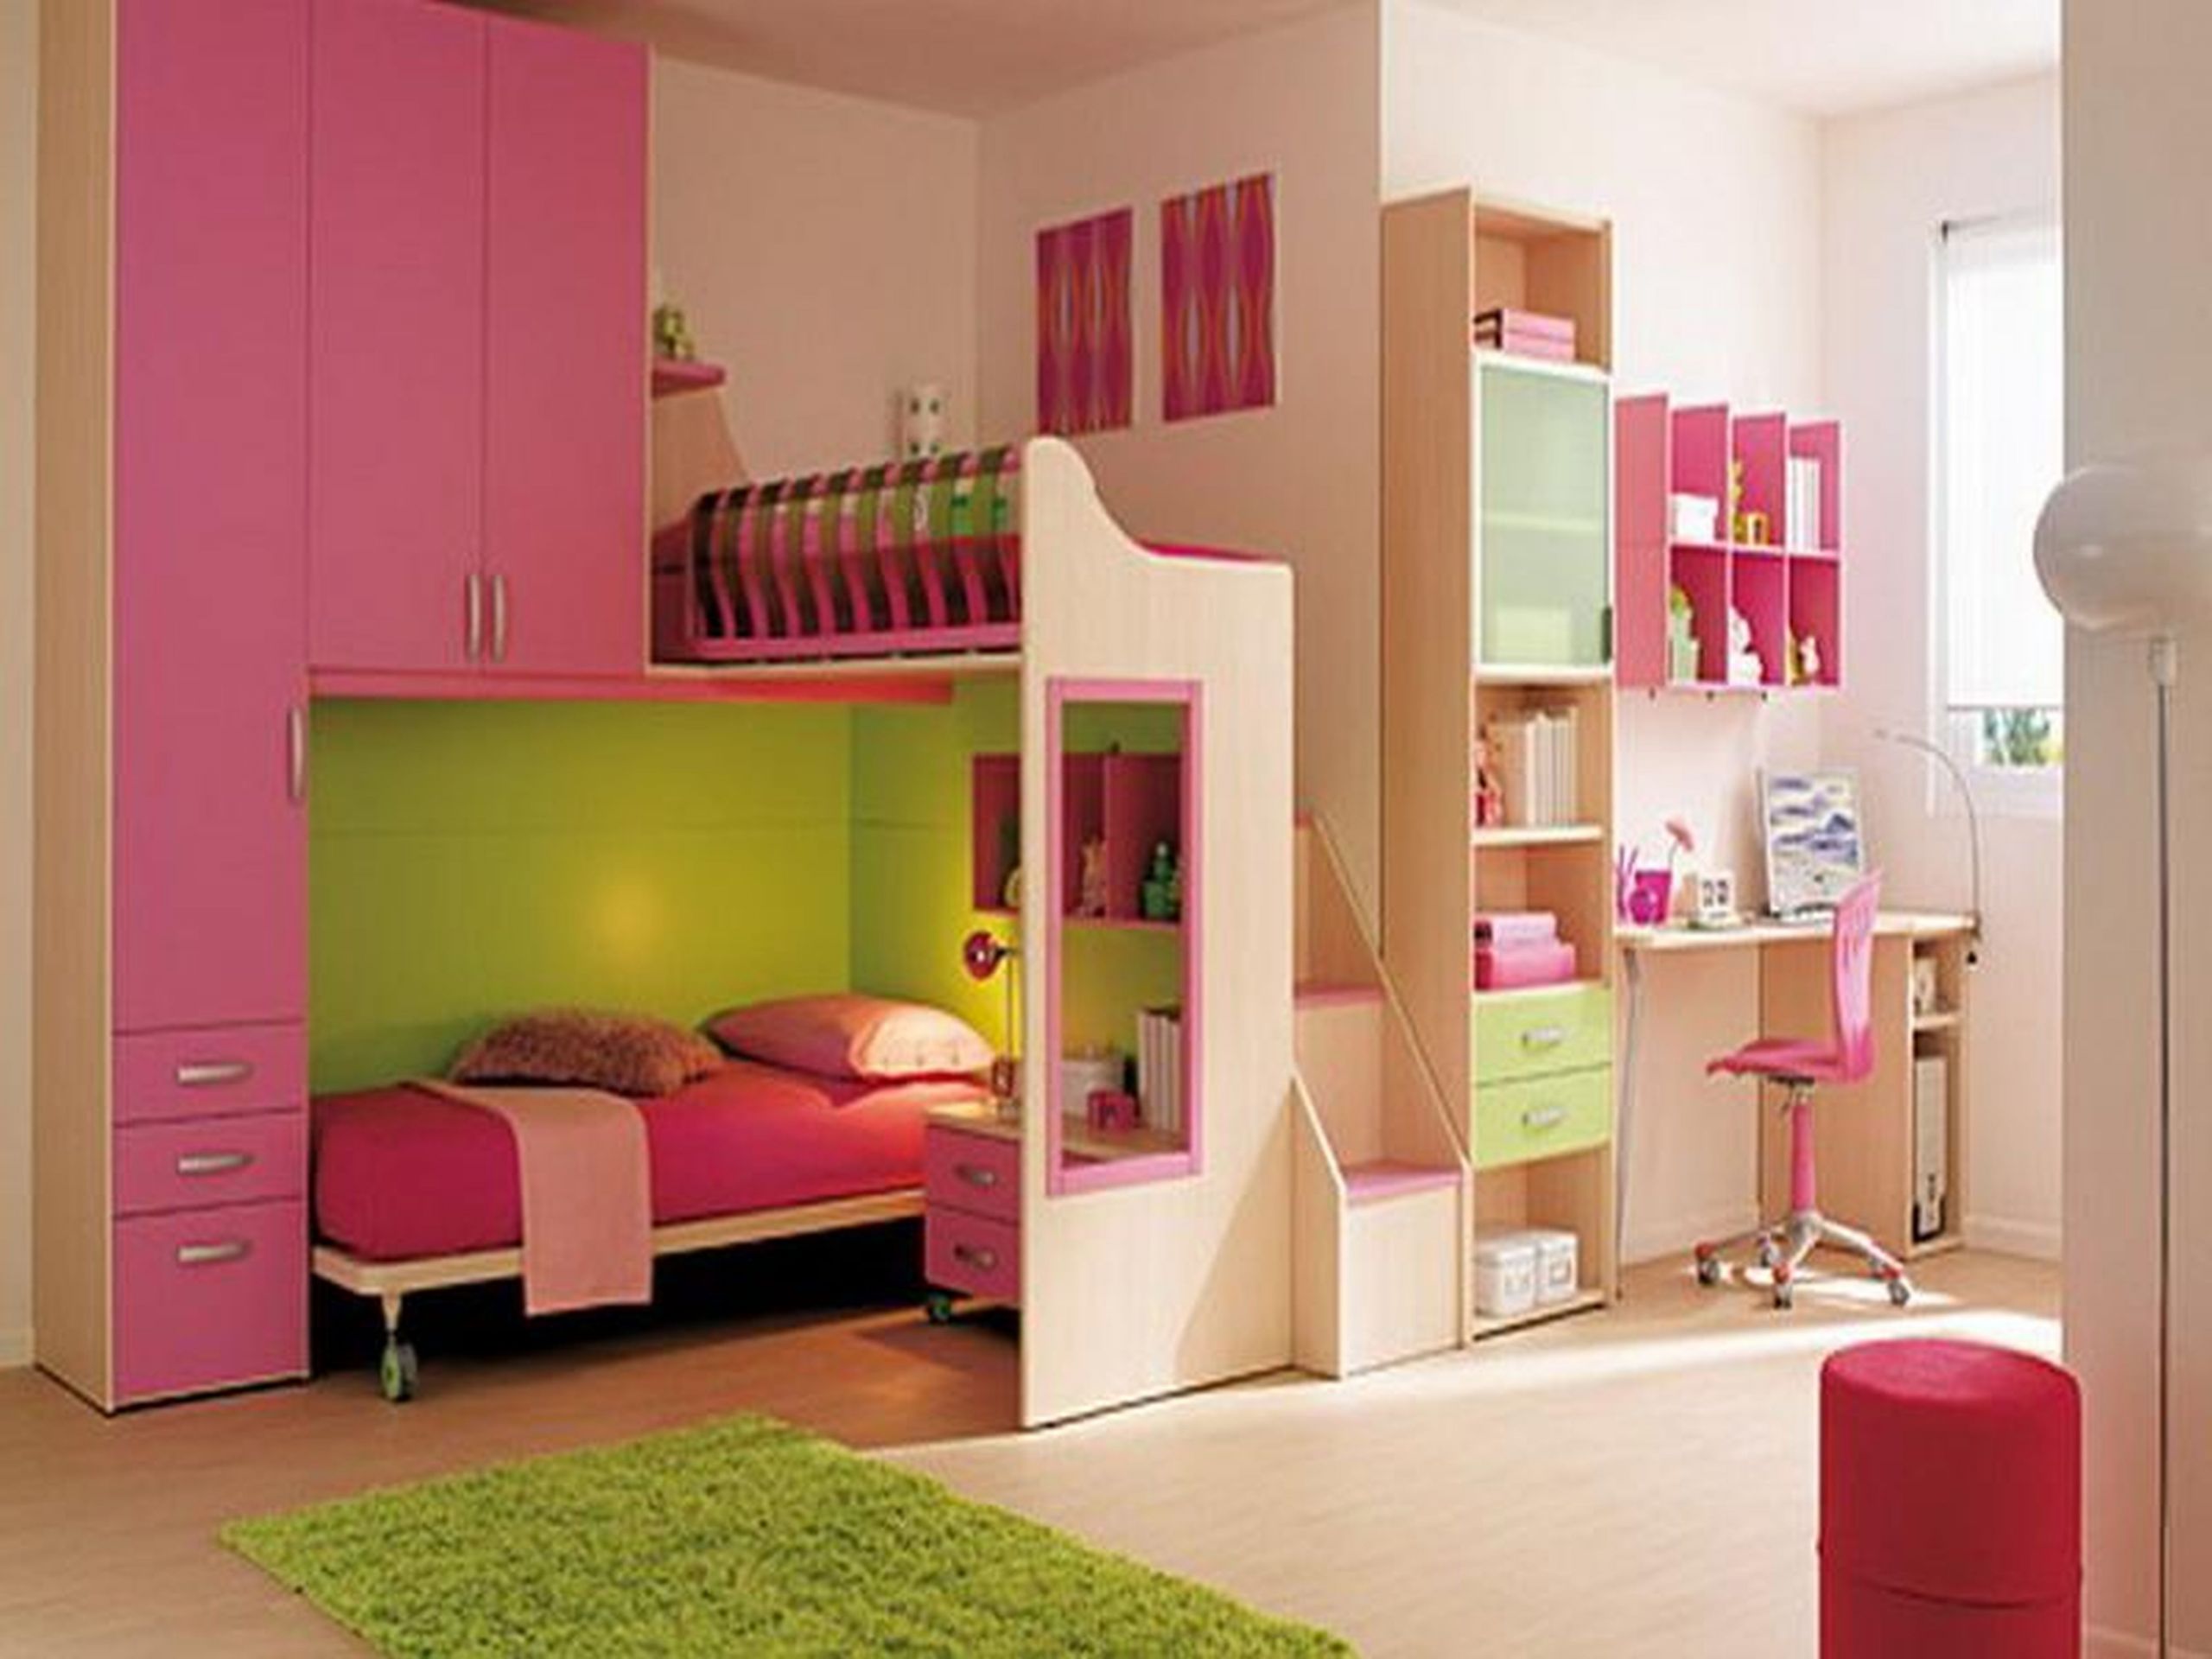 DIY Projects For Kids Room
 DIY Storage Ideas For Kids Room Crafts To Do With Kids